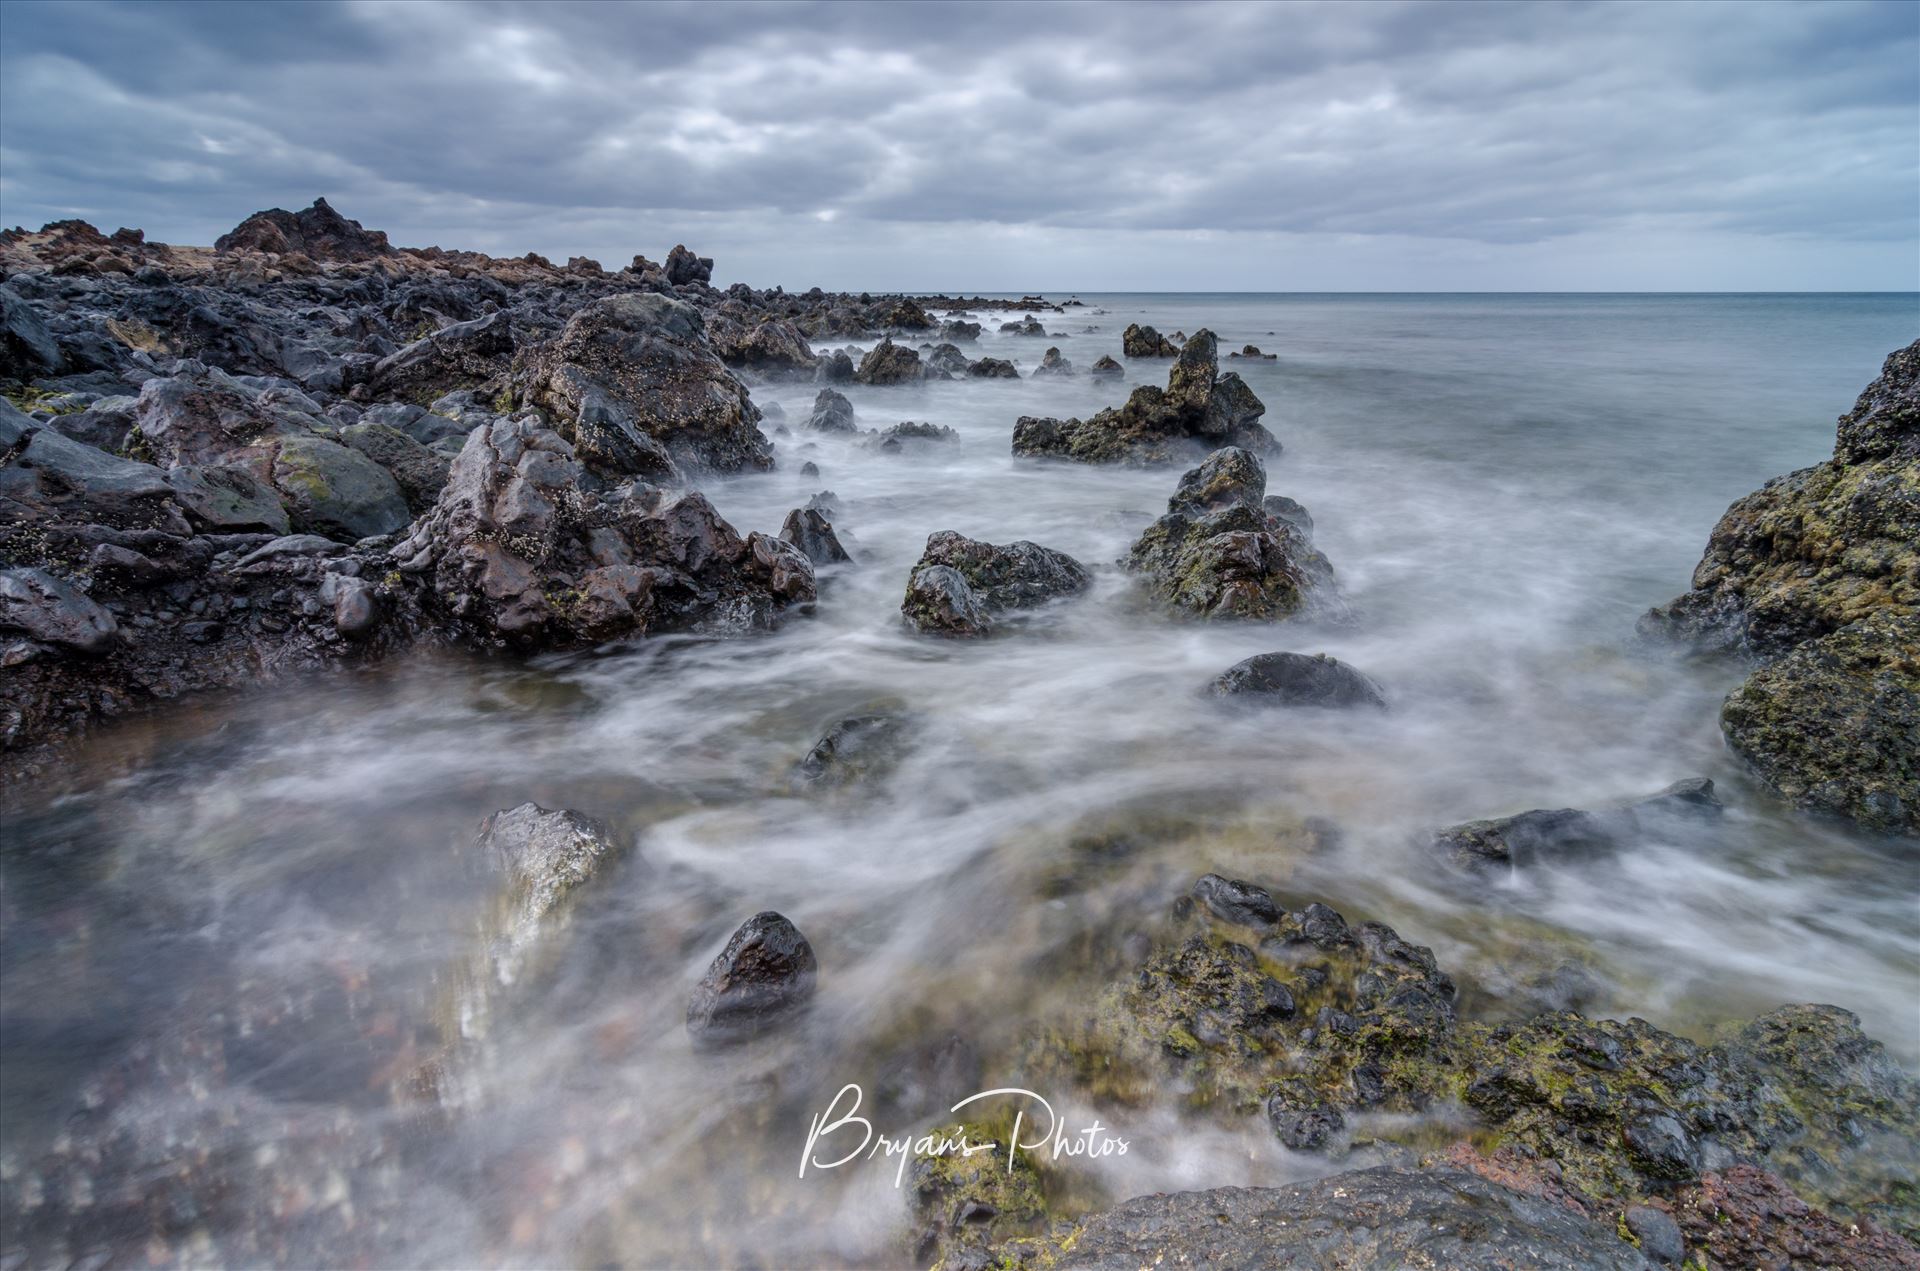 Volcanic Seascape A photograph taken from the beach at Los Piccolos Lanzarote looking out over the Atlantic Ocean. by Bryans Photos